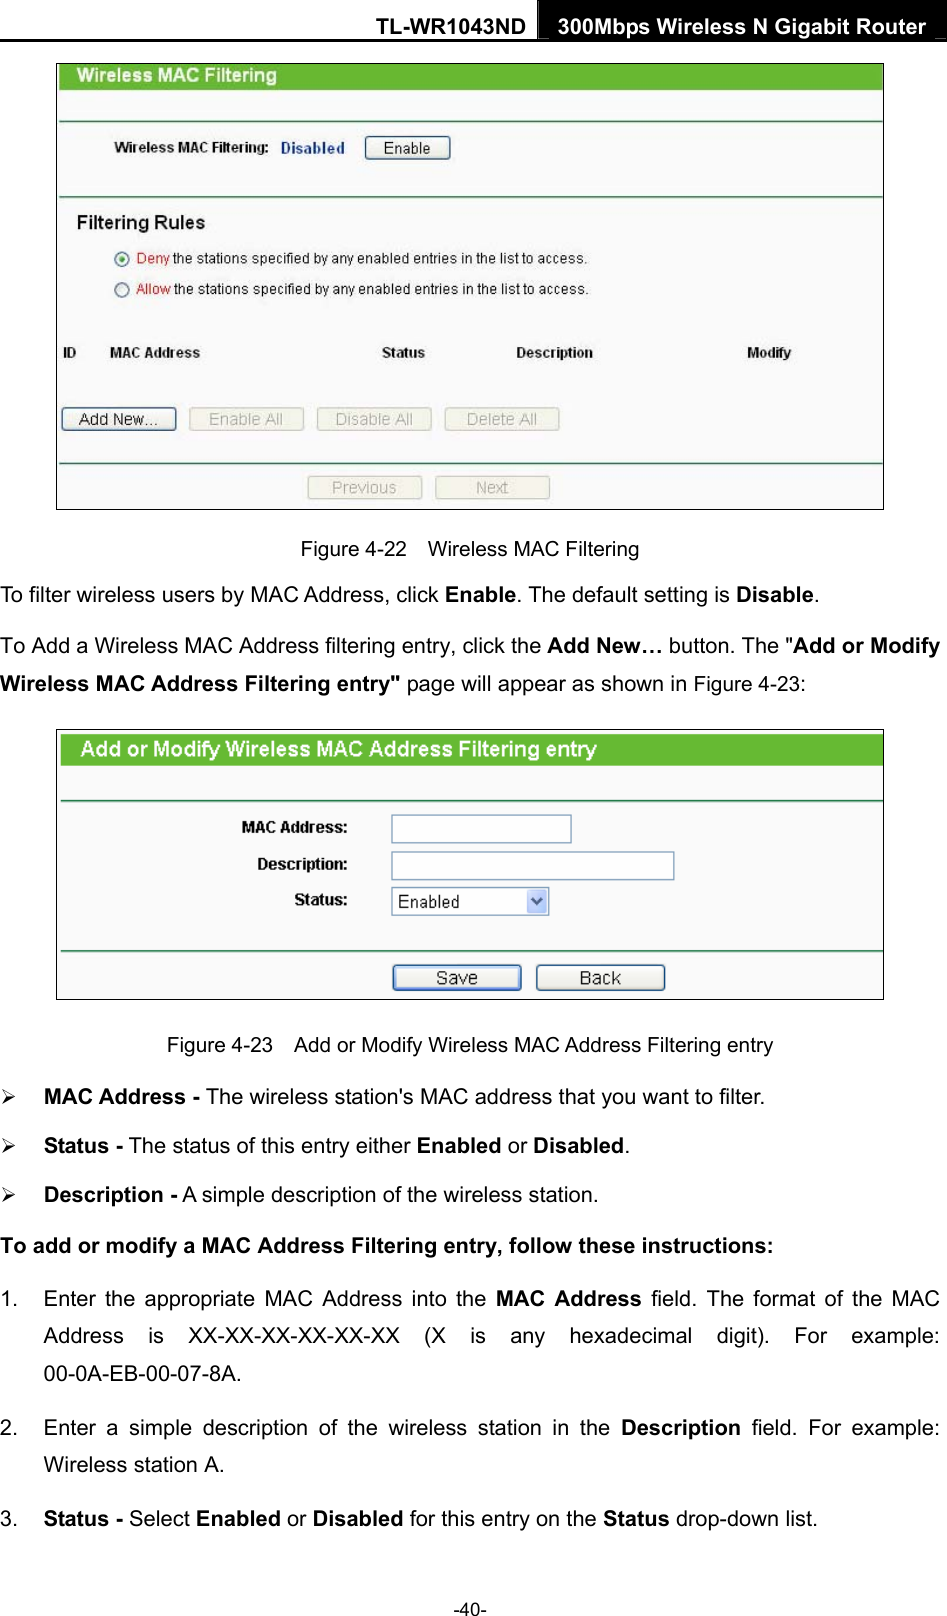 TL-WR1043ND 300Mbps Wireless N Gigabit Router   Figure 4-22    Wireless MAC Filtering To filter wireless users by MAC Address, click Enable. The default setting is Disable. To Add a Wireless MAC Address filtering entry, click the Add New… button. The &quot;Add or Modify Wireless MAC Address Filtering entry&quot; page will appear as shown in Figure 4-23:  Figure 4-23    Add or Modify Wireless MAC Address Filtering entry ¾ MAC Address - The wireless station&apos;s MAC address that you want to filter.   ¾ Status - The status of this entry either Enabled or Disabled. ¾ Description - A simple description of the wireless station.   To add or modify a MAC Address Filtering entry, follow these instructions: 1.  Enter the appropriate MAC Address into the MAC Address field. The format of the MAC Address is XX-XX-XX-XX-XX-XX (X is any hexadecimal digit). For example: 00-0A-EB-00-07-8A.  2.  Enter a simple description of the wireless station in the Description field. For example: Wireless station A. 3.  Status - Select Enabled or Disabled for this entry on the Status drop-down list. -40- 